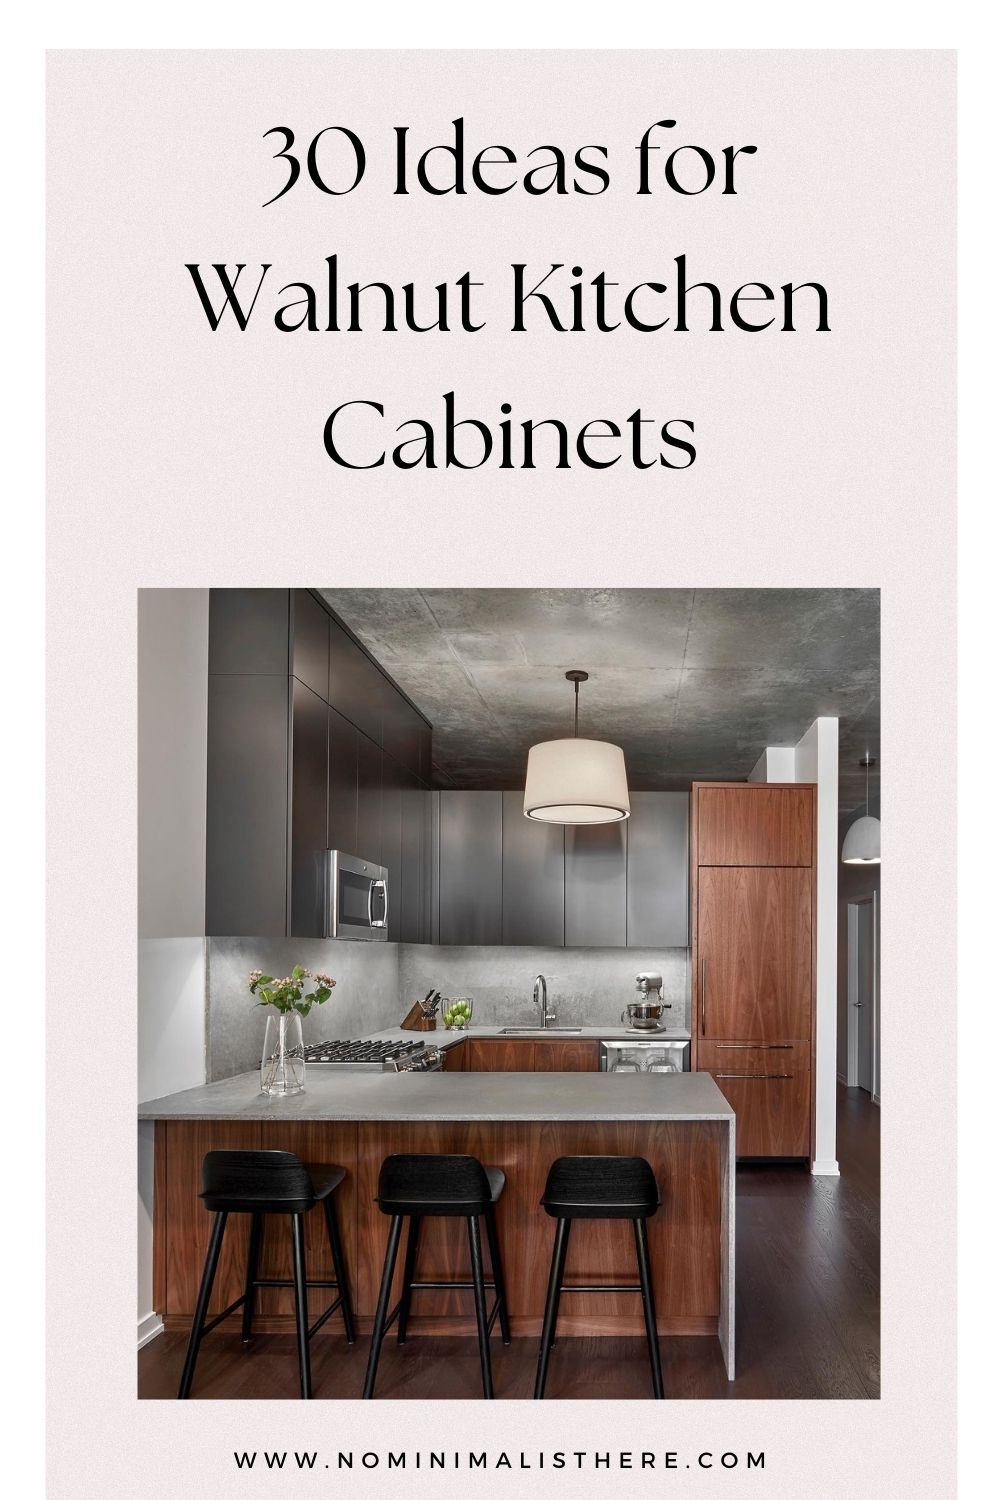 pinterest image for an article about walnut kitchen cabinets